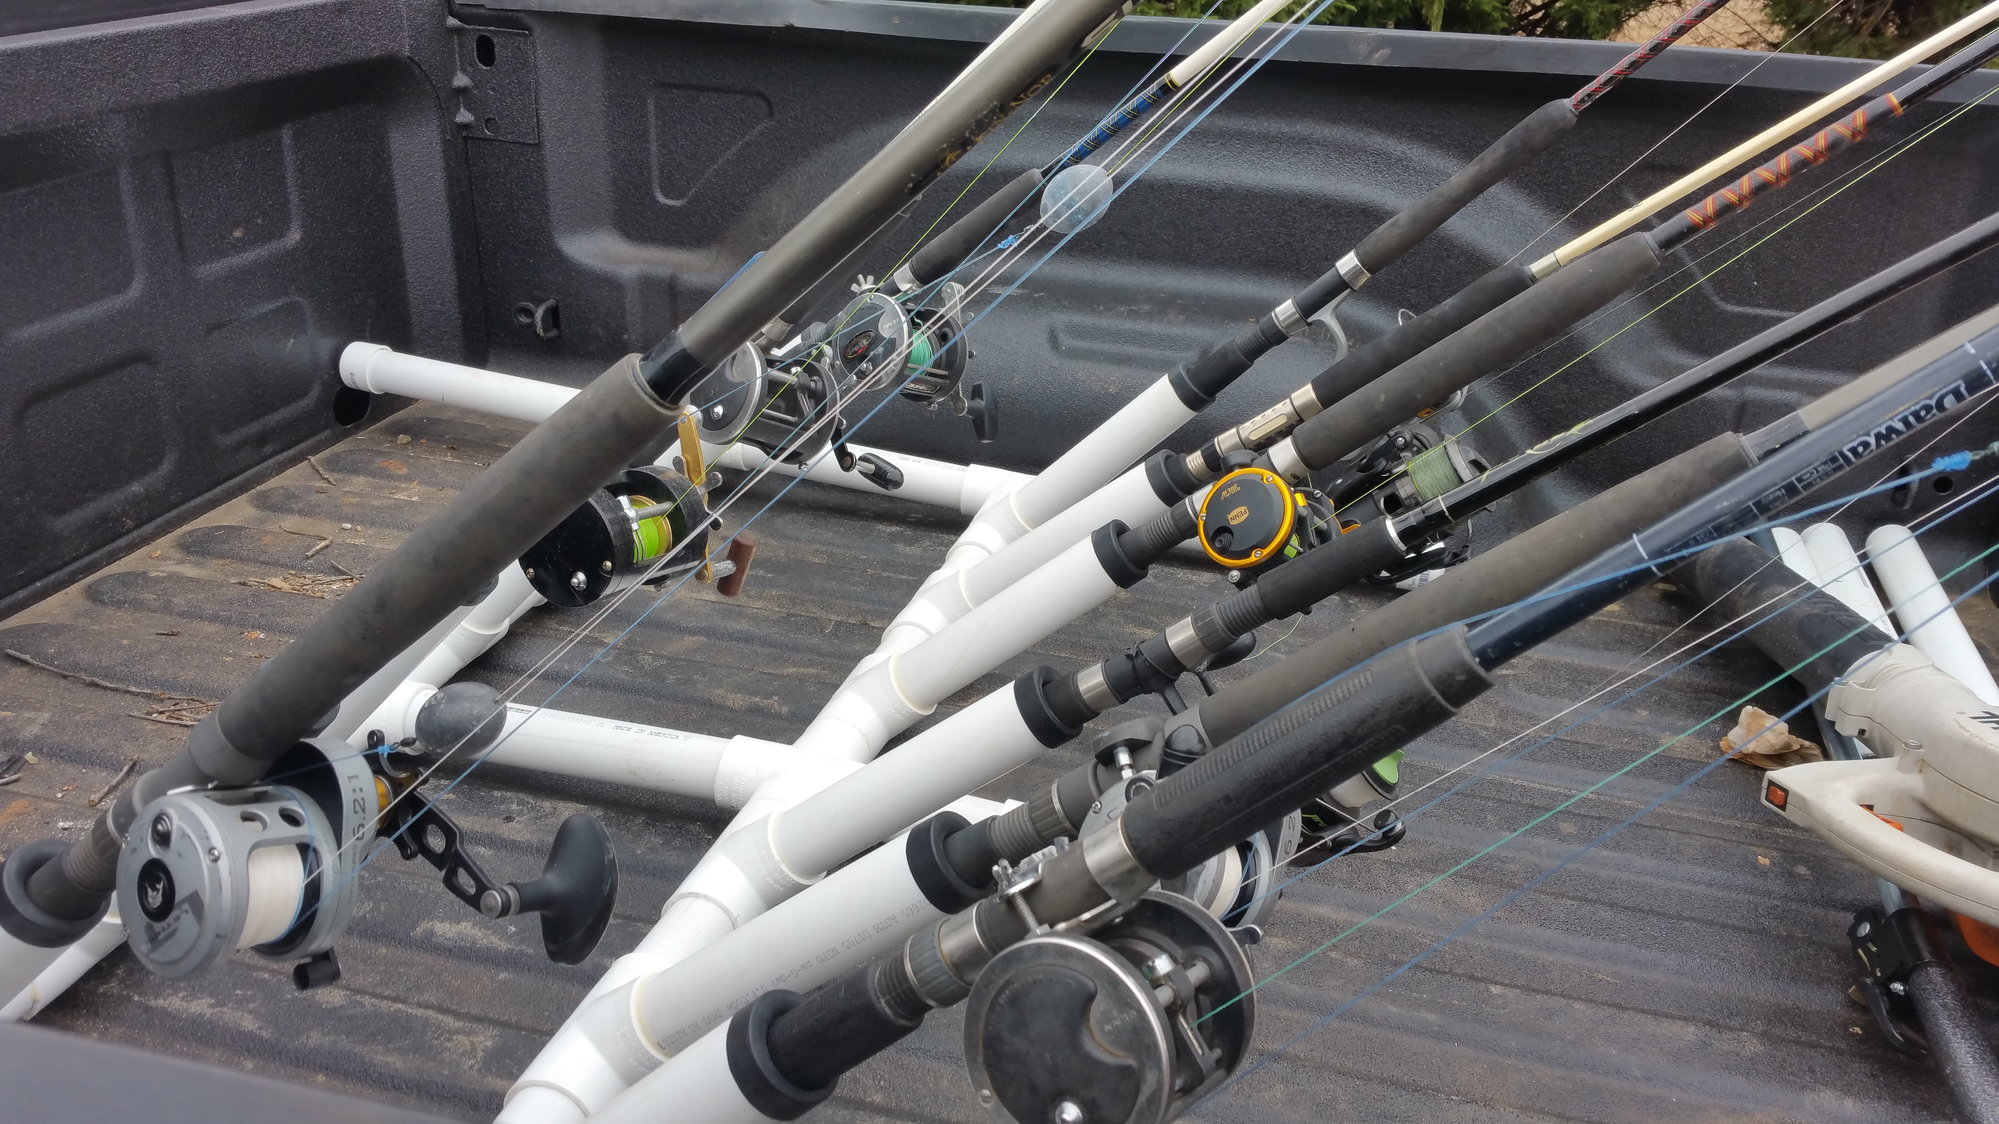 Cheap Rod Holder For Truck - The Hull Truth - Boating and Fishing Forum